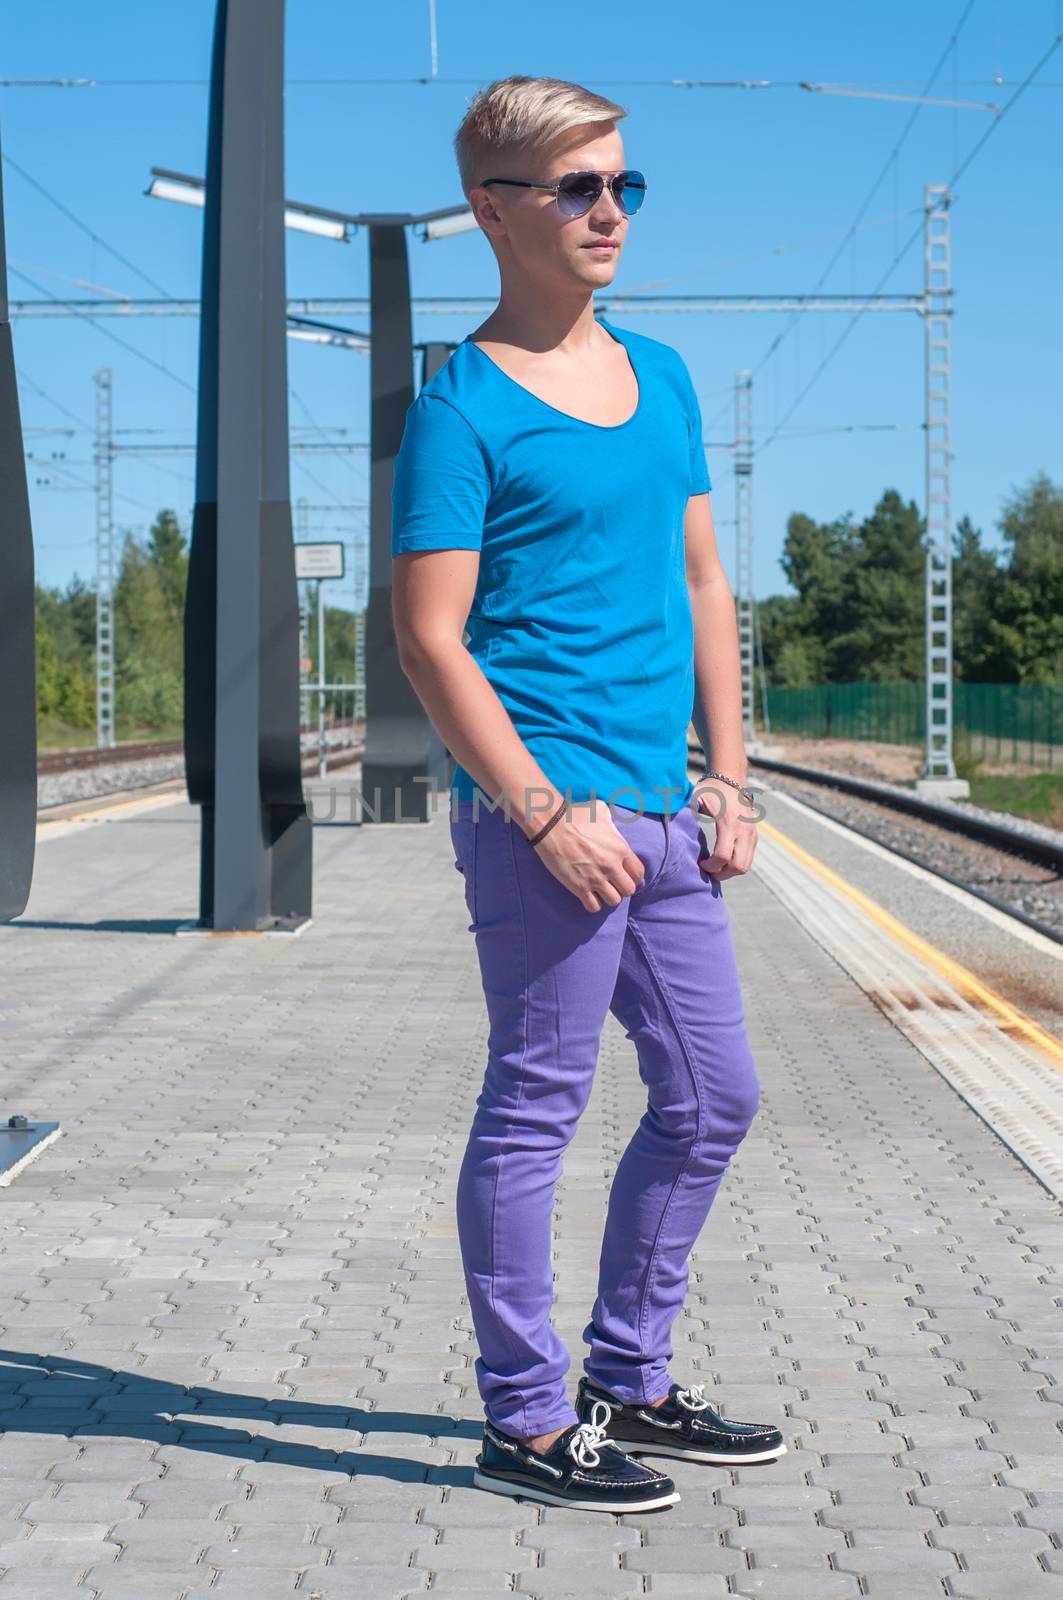 Stylish man  in blue standing on train station by anytka